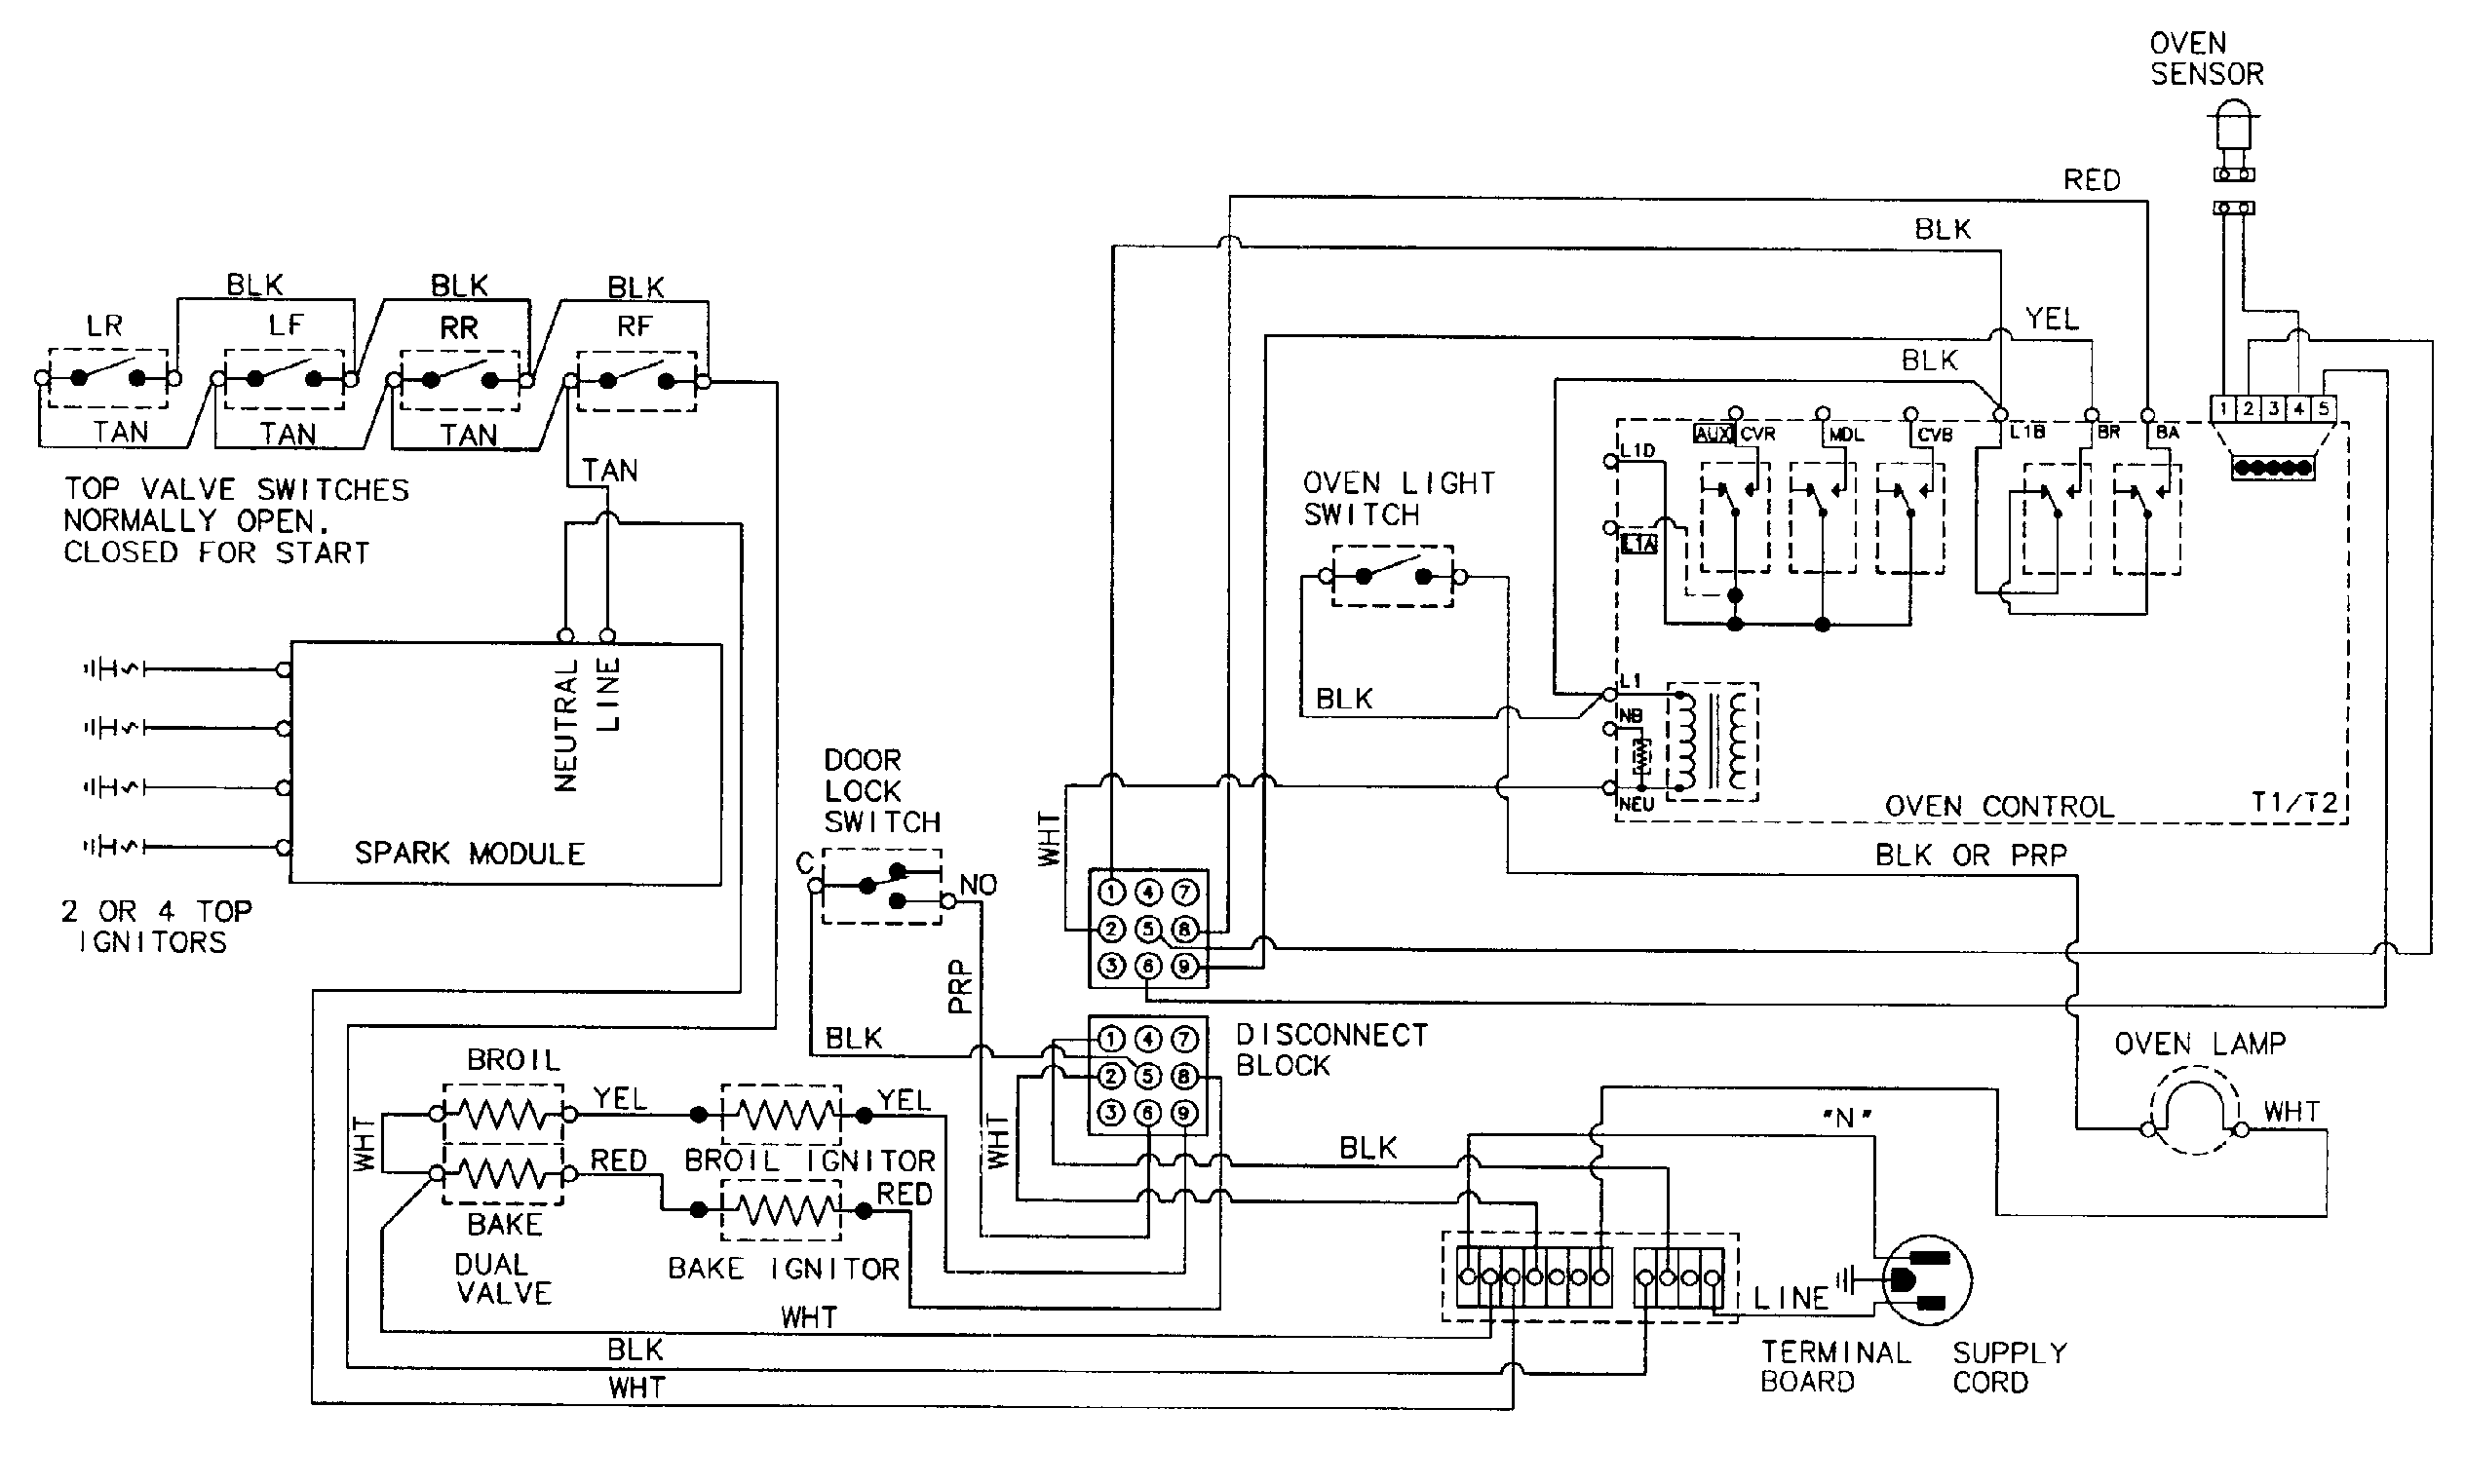 1949 Ford 8N Wiring Diagram from c.searspartsdirect.com